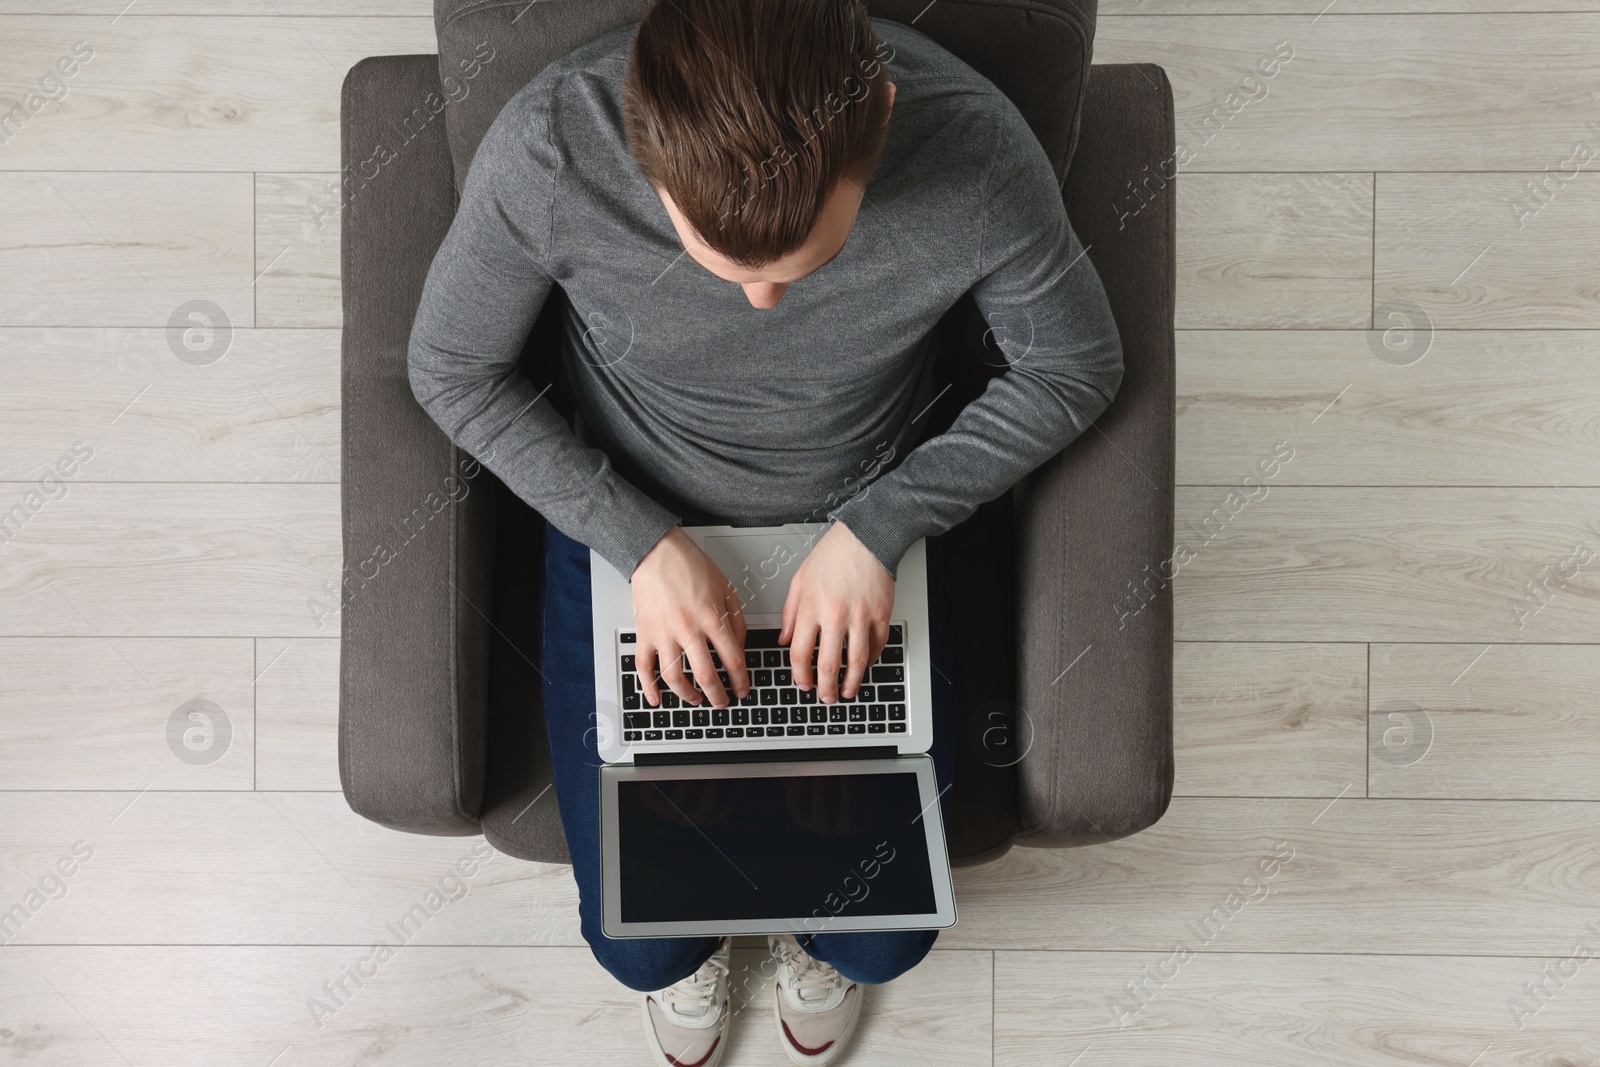 Photo of Man working with laptop in armchair, top view